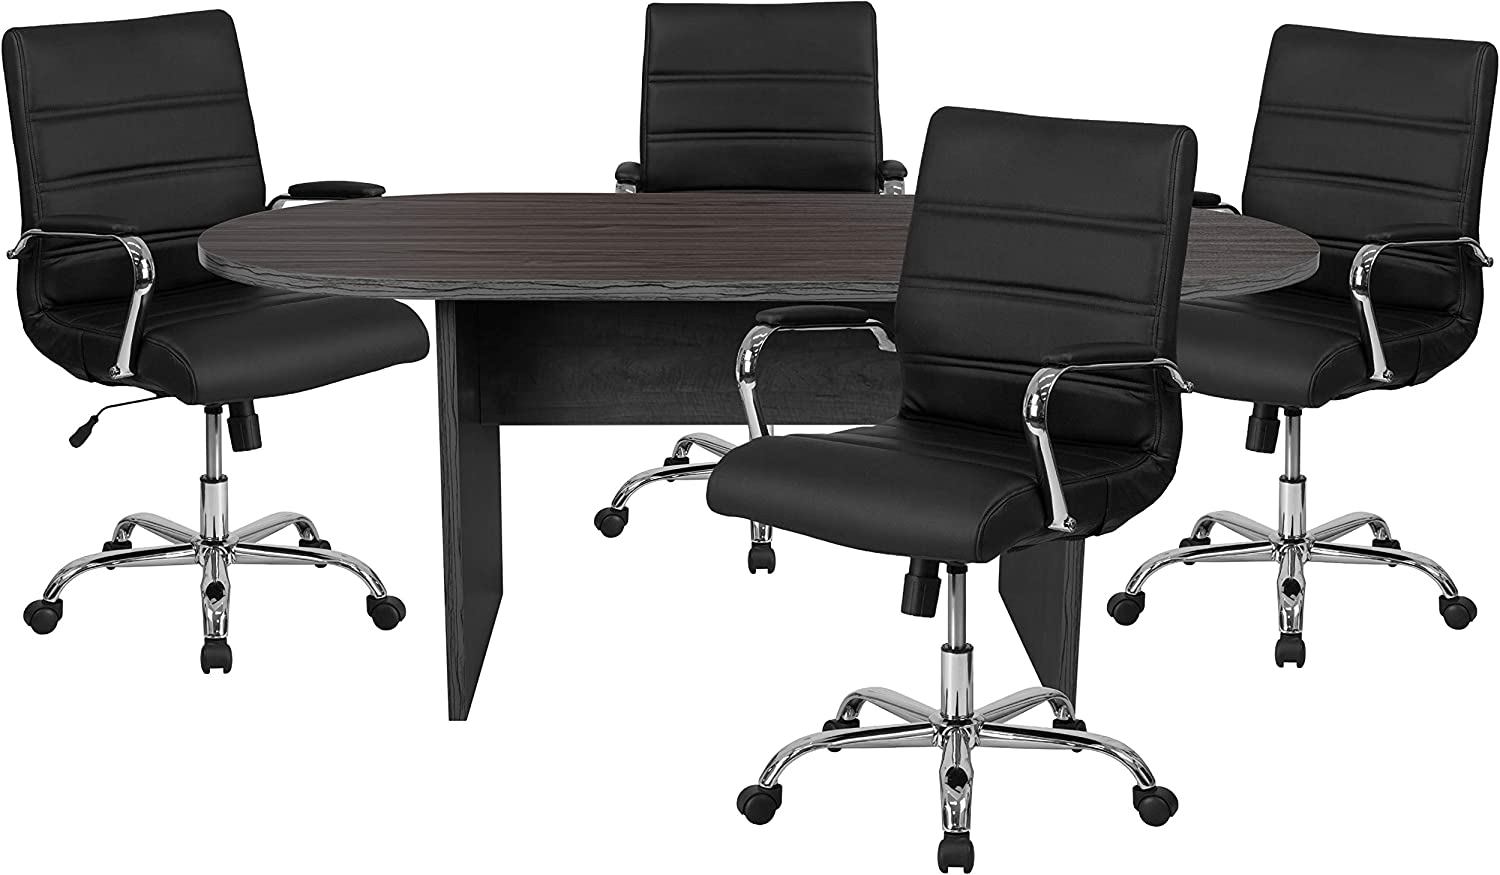 Flash Furniture 5 Piece Rustic Gray Oval Conference Table Set with 4 Black and Chrome LeatherSoft Executive Chairs